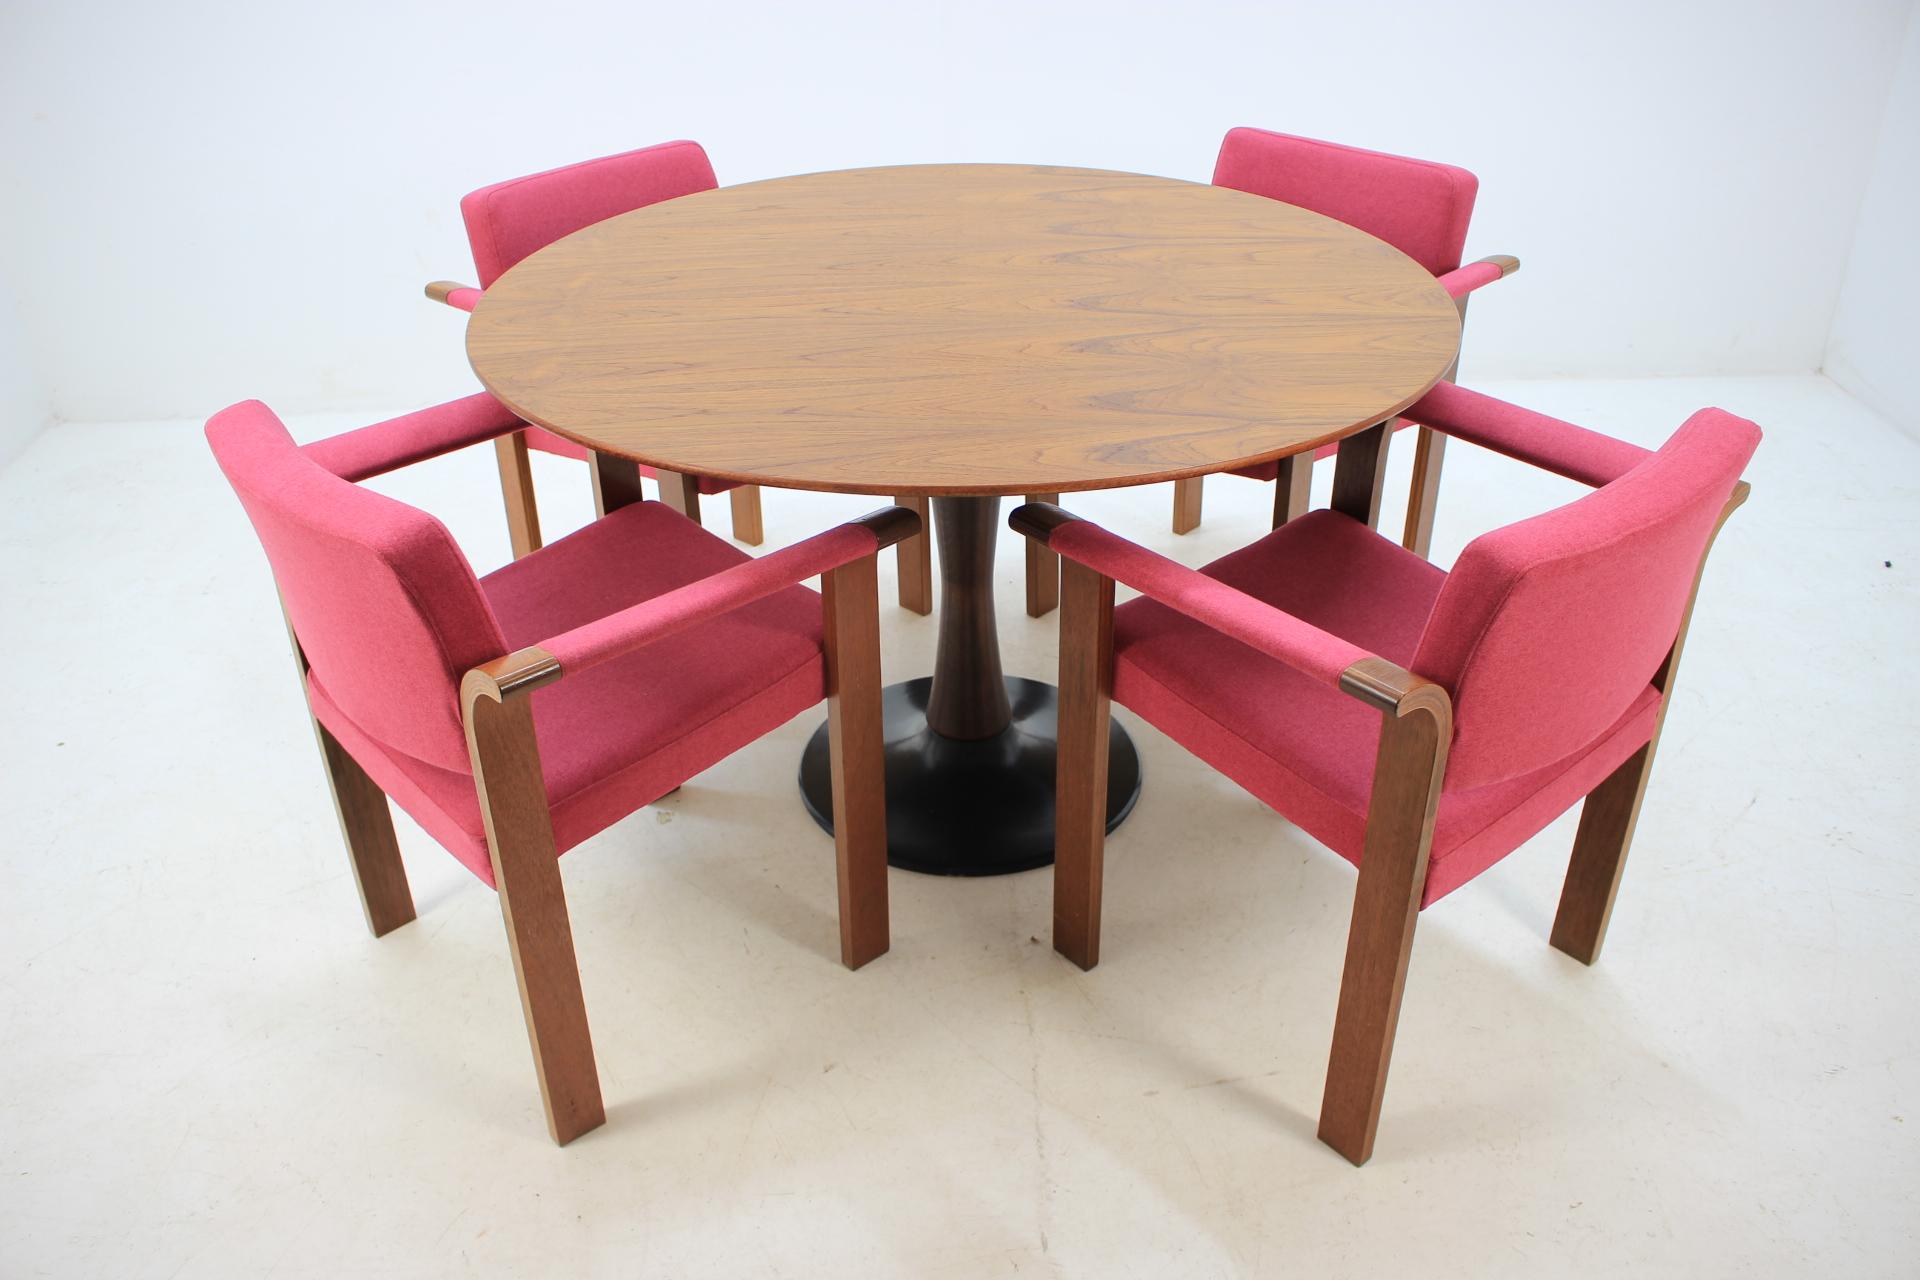 The chairs has been newly upholstered and the wooden frames has been repolished. The round teak table has been carefully refurbished.

Table measurement: Height 73 cm, diameter 120 cm.